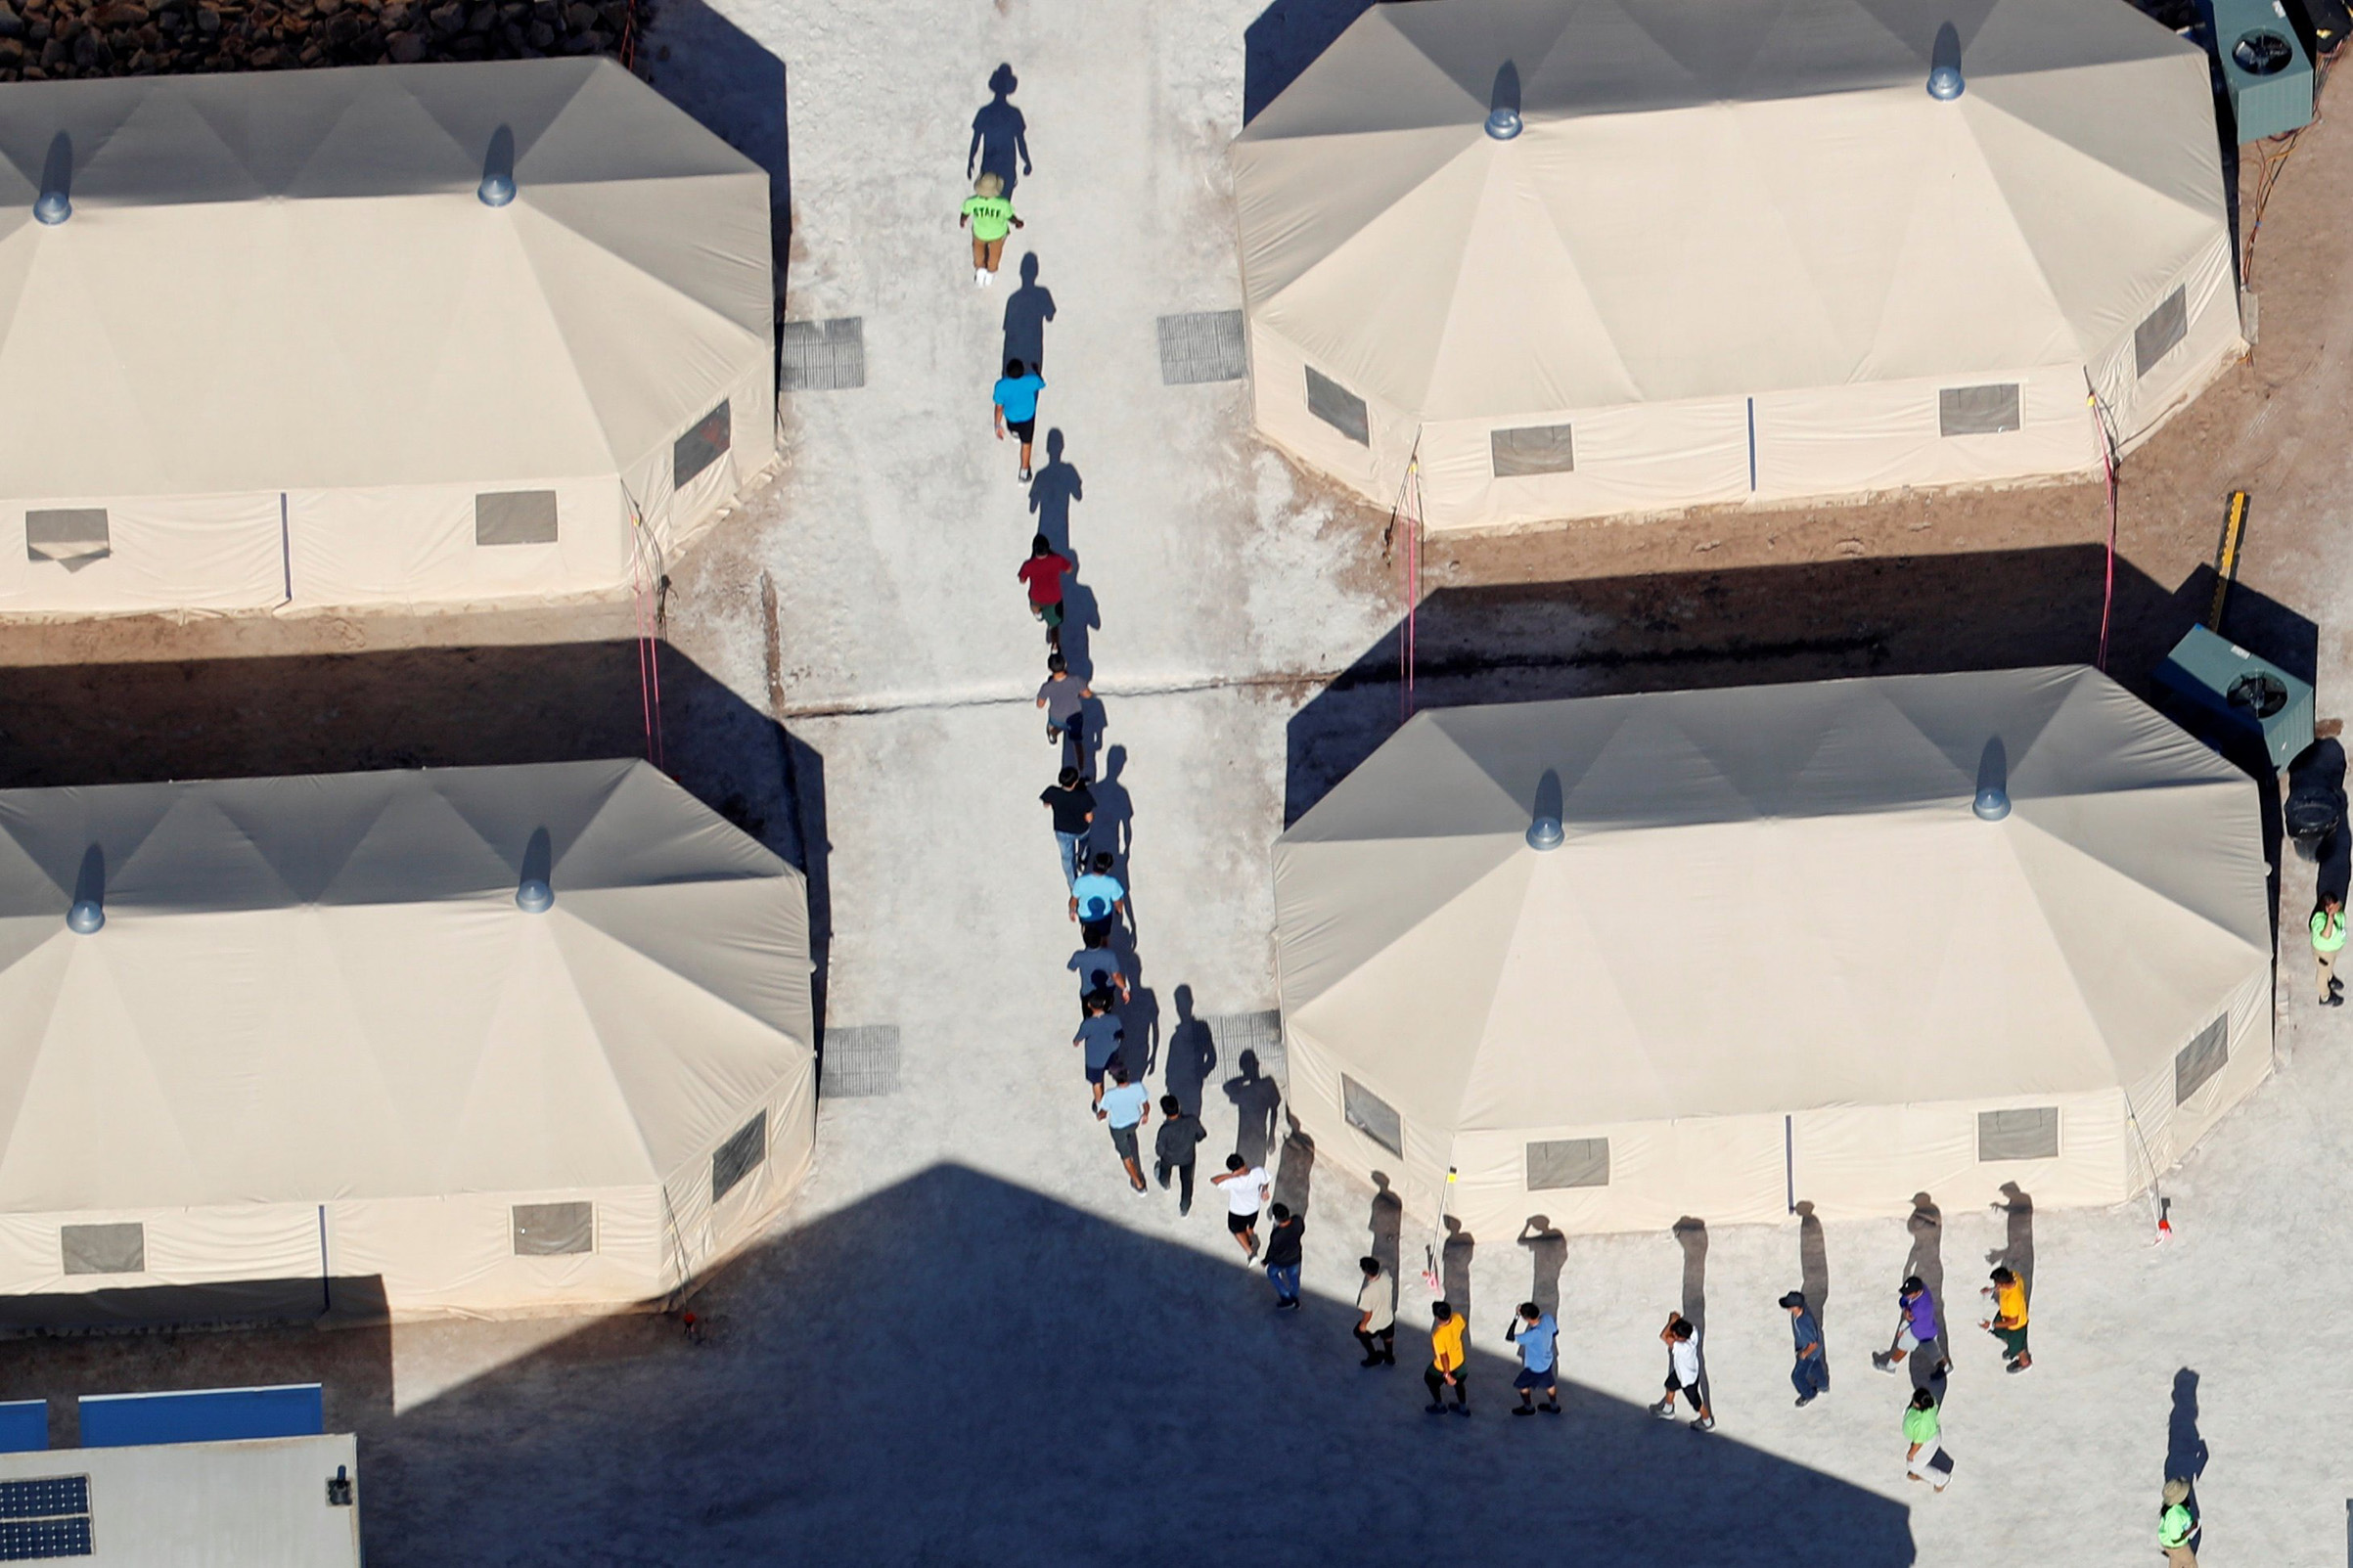 Immigrant children in custody in Tornillo, Texas, on June 18 (Mike Blake—Reuters)